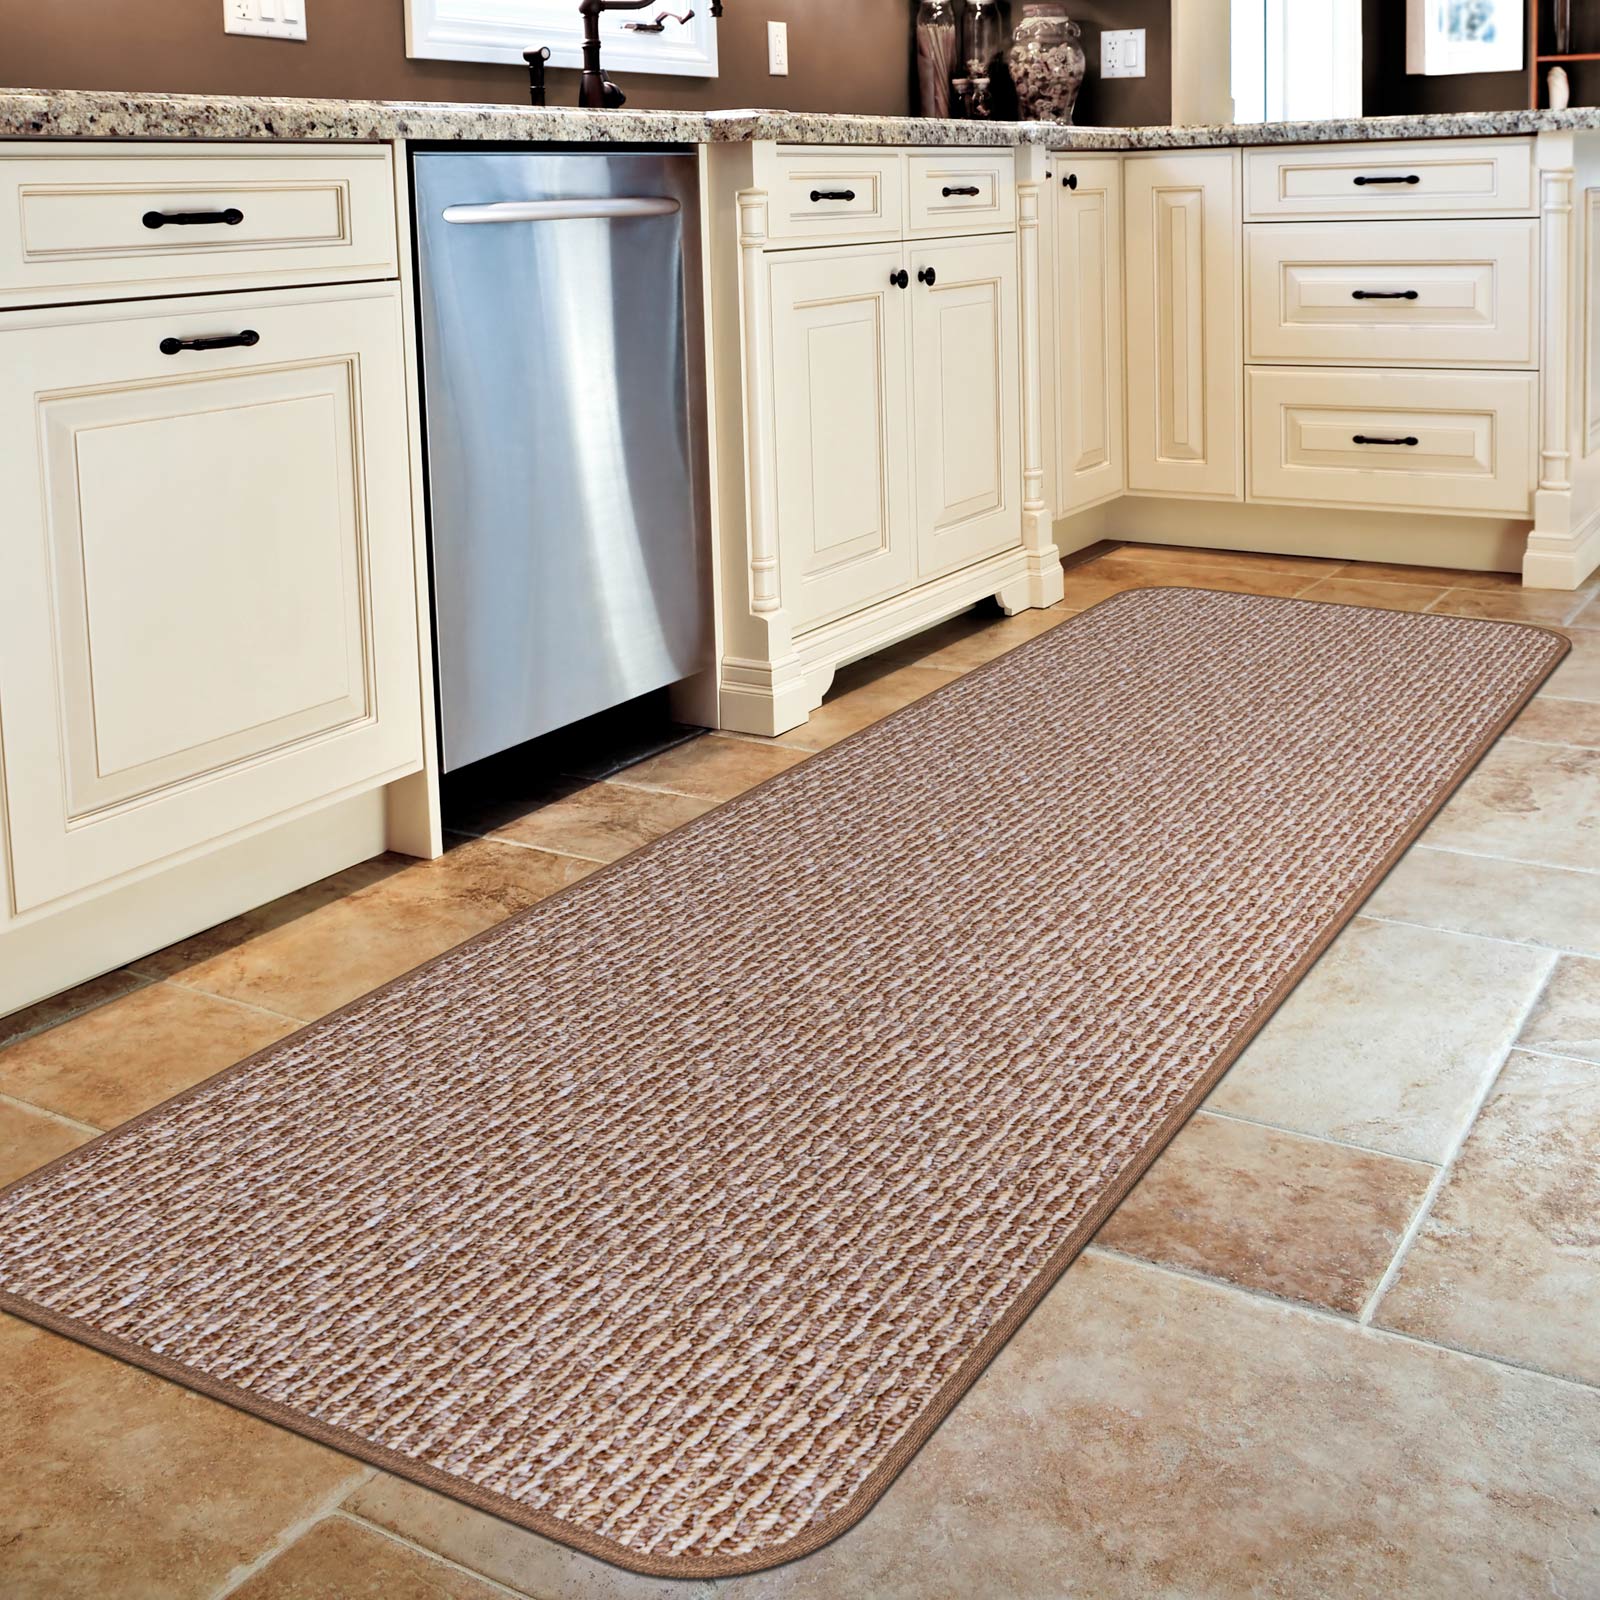 House, Home and More Skid-resistant Carpet Runner - Praline Brown - 24 Ft. X 36 In.